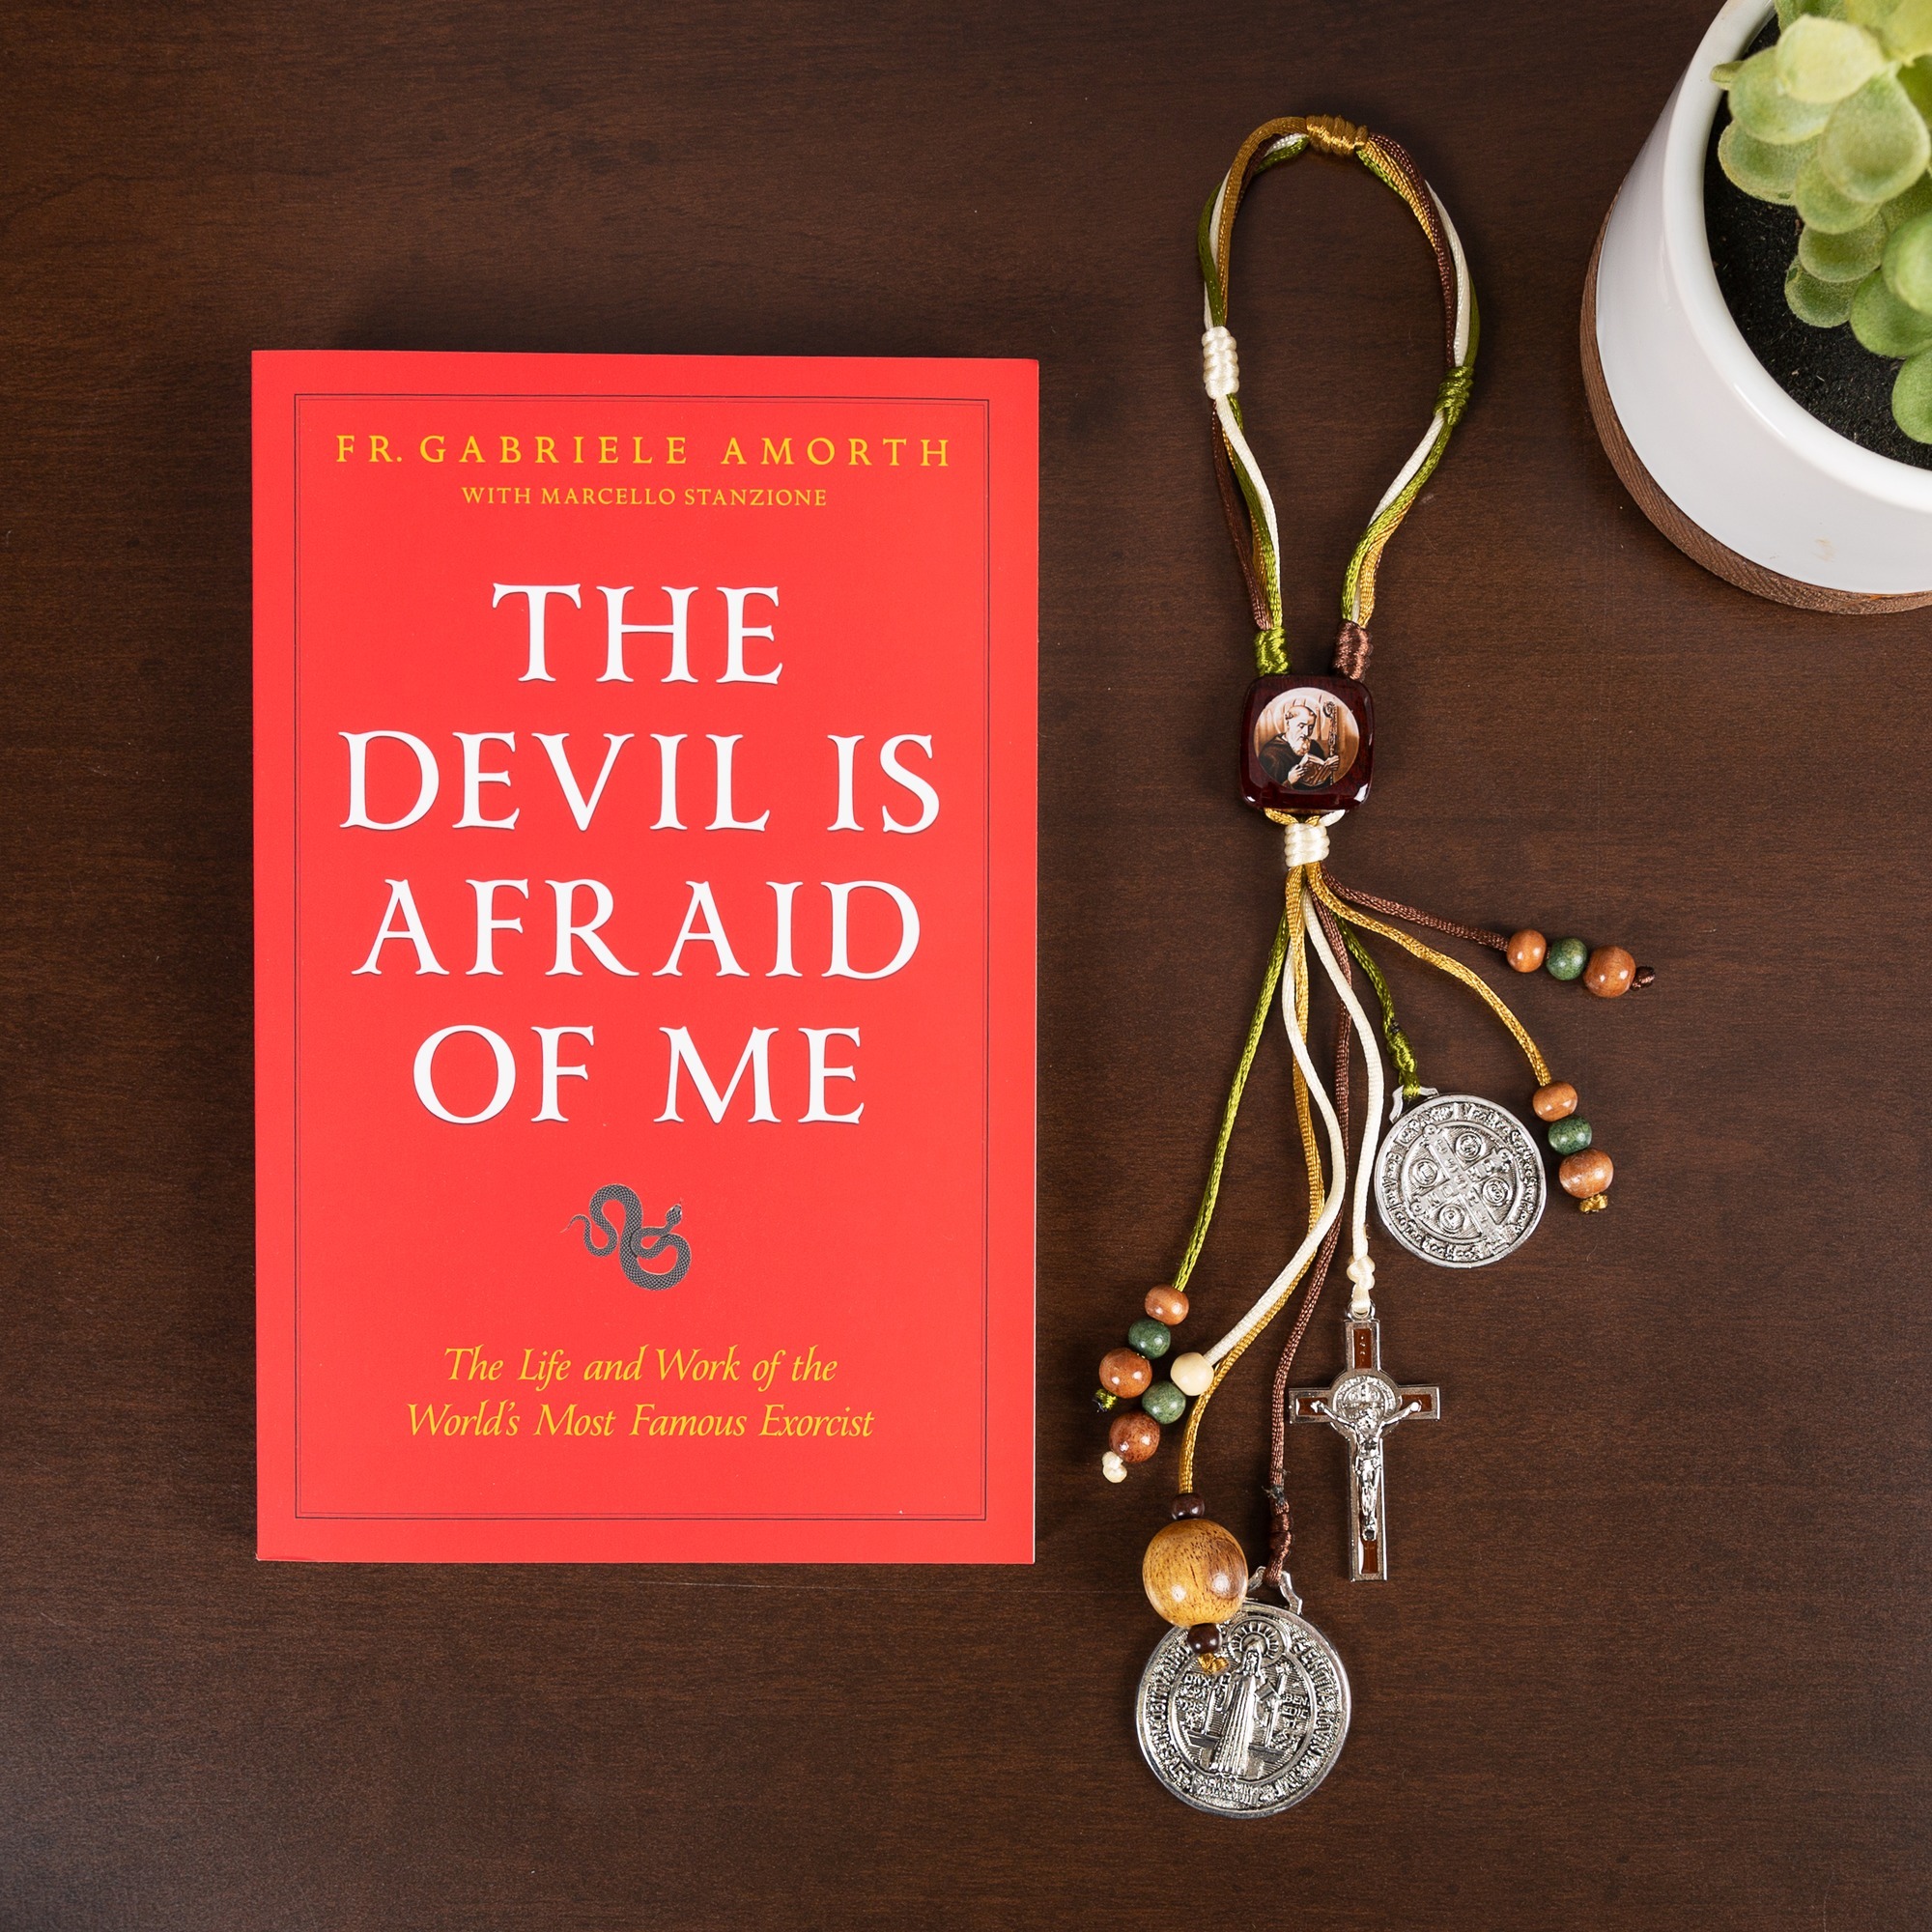 Famous Catholic Priest Who Has Performed Thousands of Exorcisms Recounts How He Came Face to Face With the Devil in New Book “The Devil Is Afraid of Me”